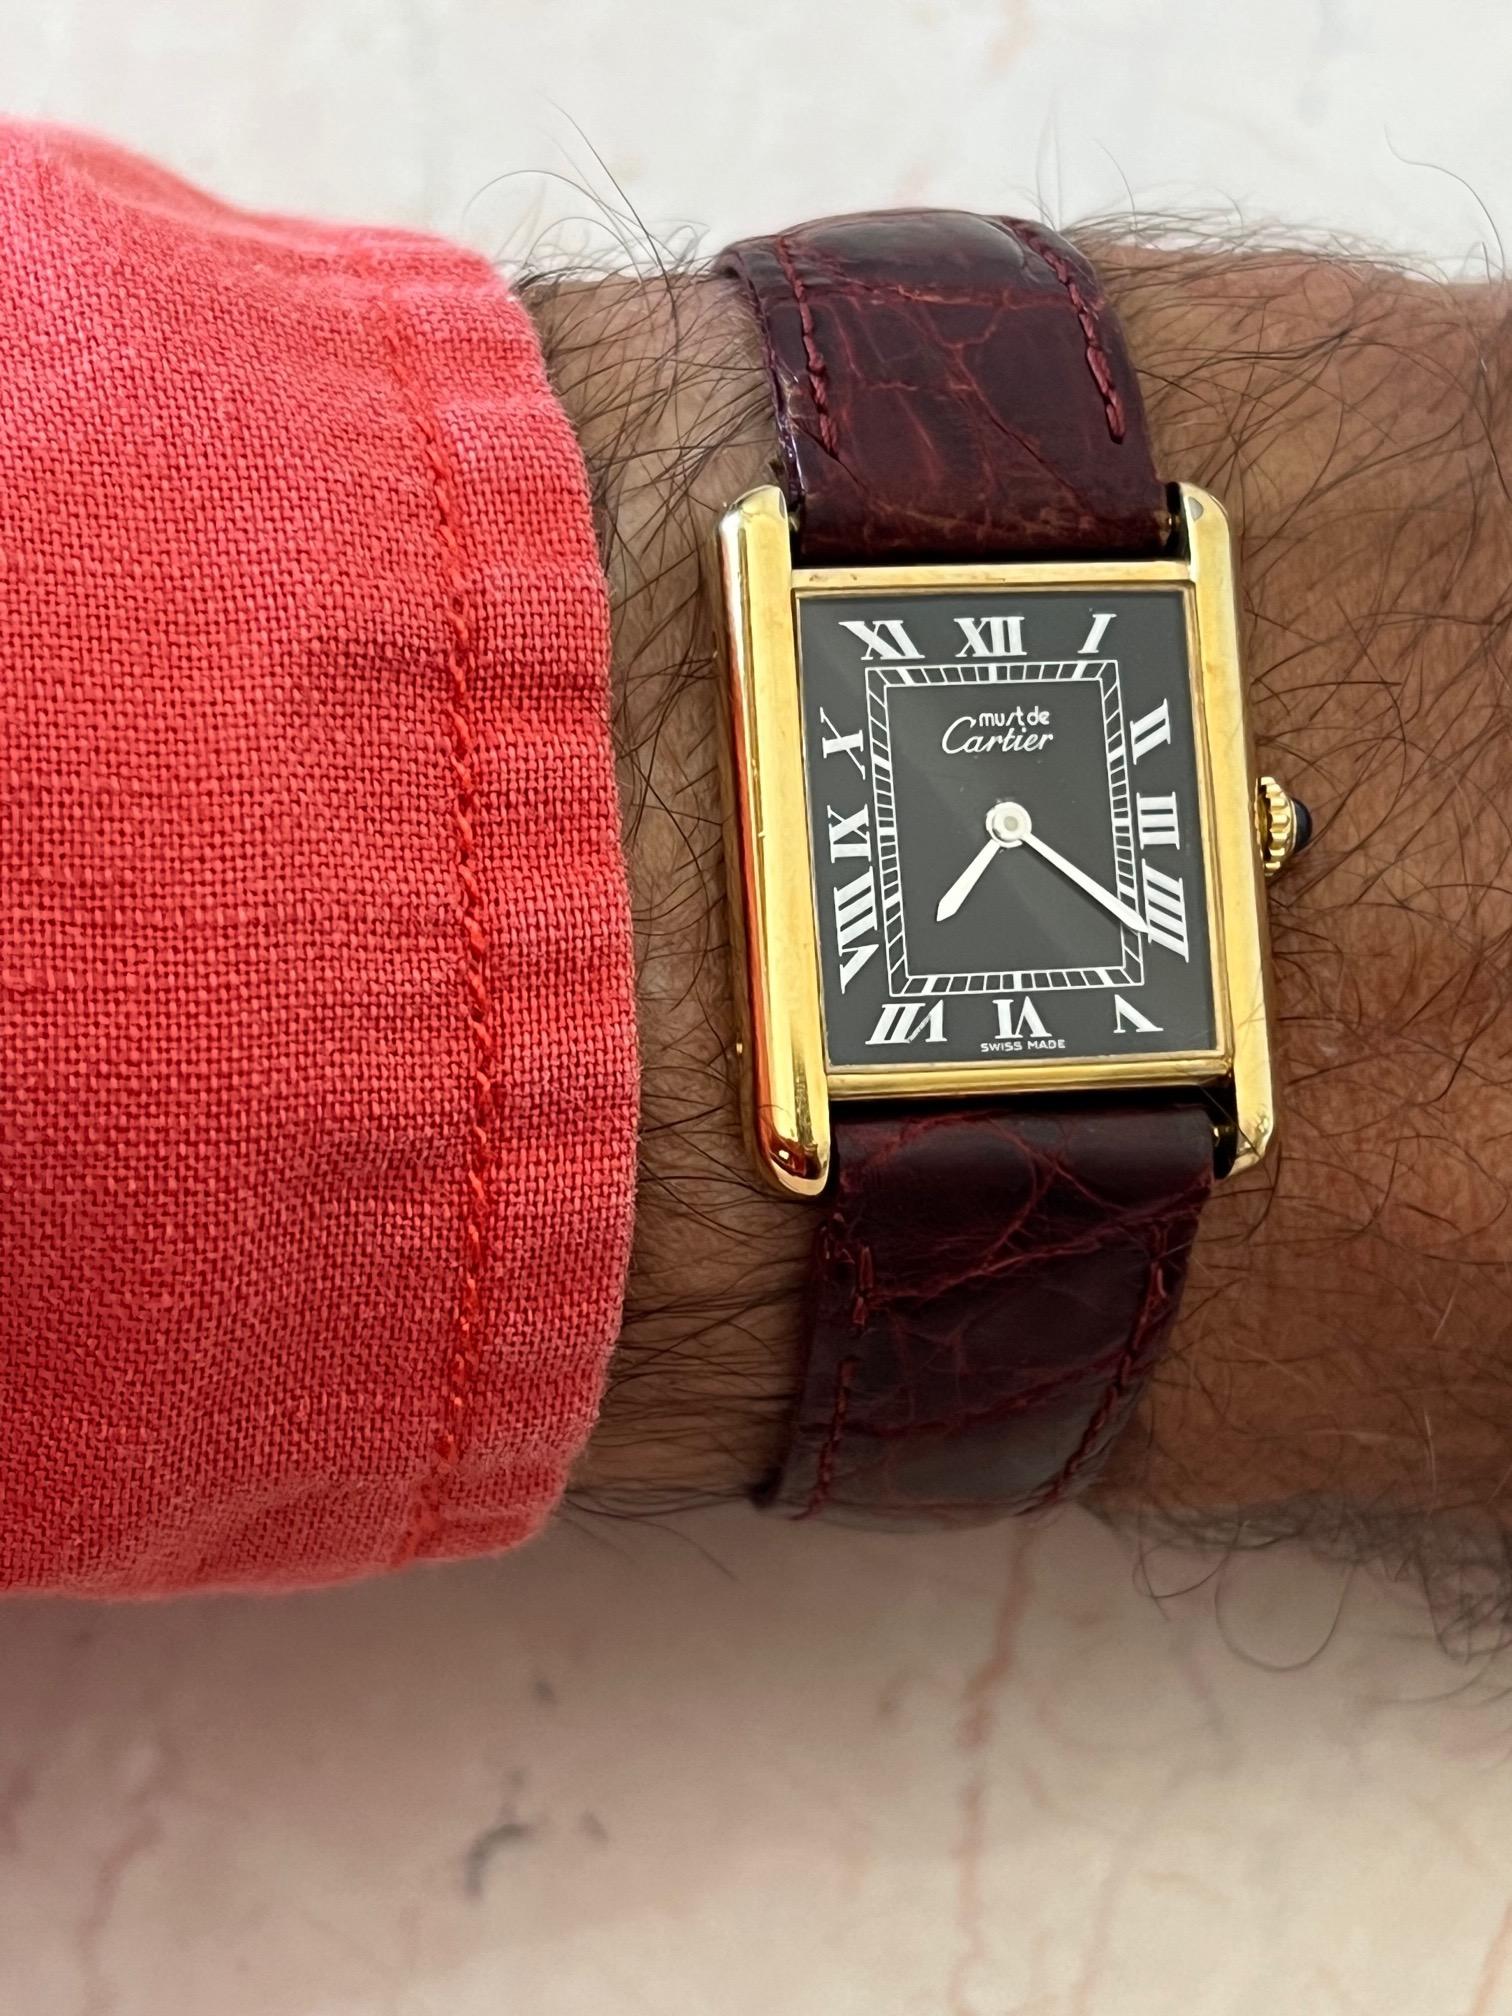 A beautiful Cartier tank watch ca' 1980's. Gold plated 925 sterling case with manual movement and classic citrine cabochon crown. Includes service pouch, guarantee, recently serviced by Cartier.